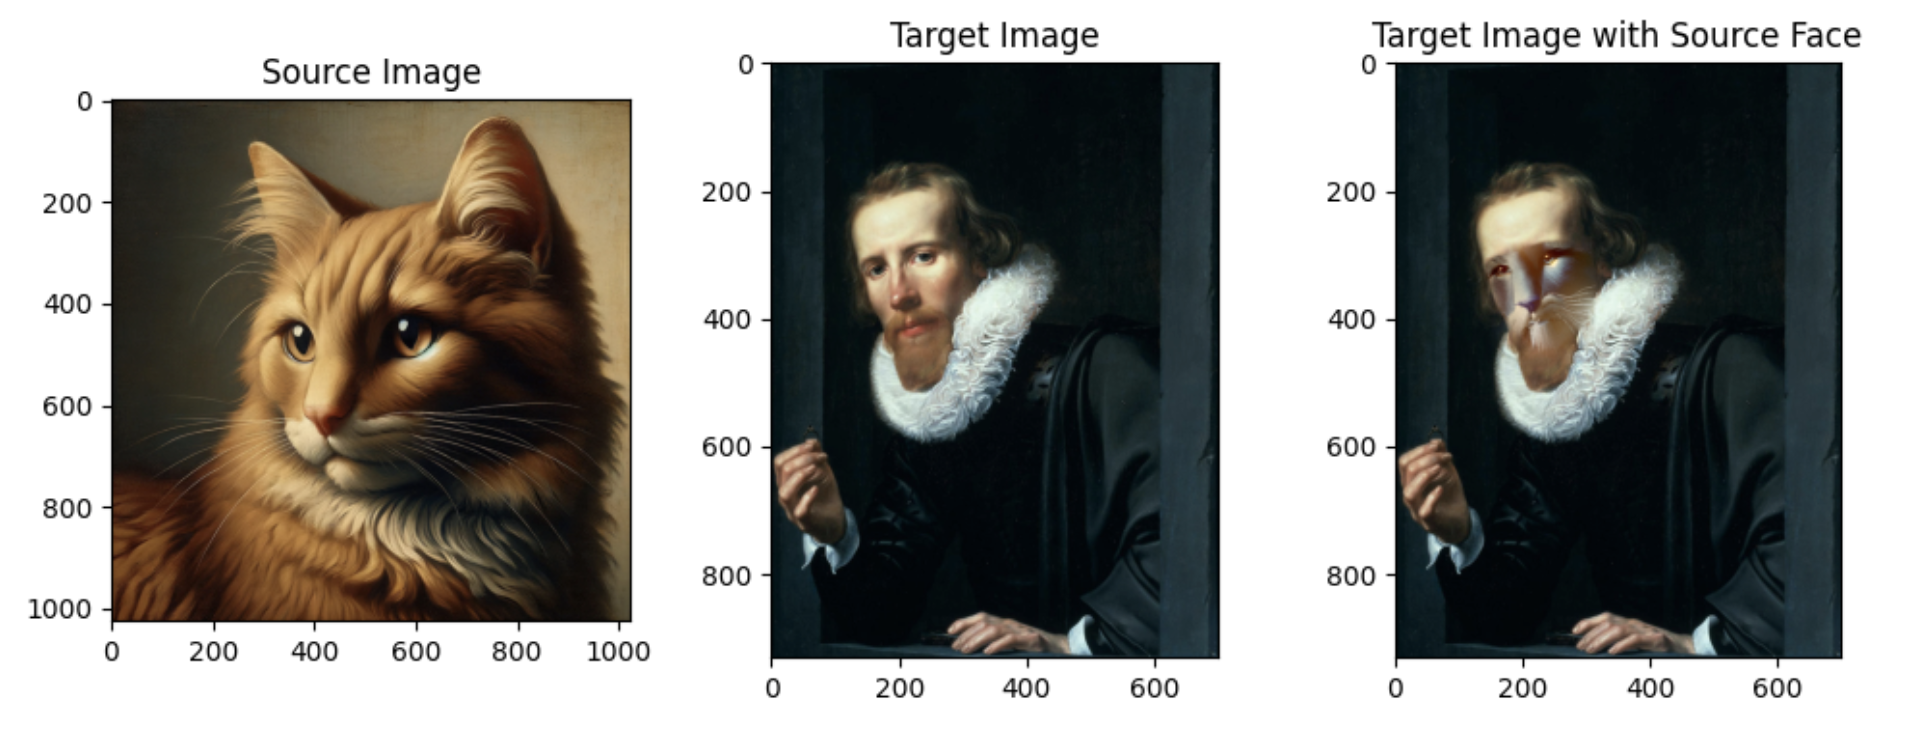 Face Migration in Classical Artwork